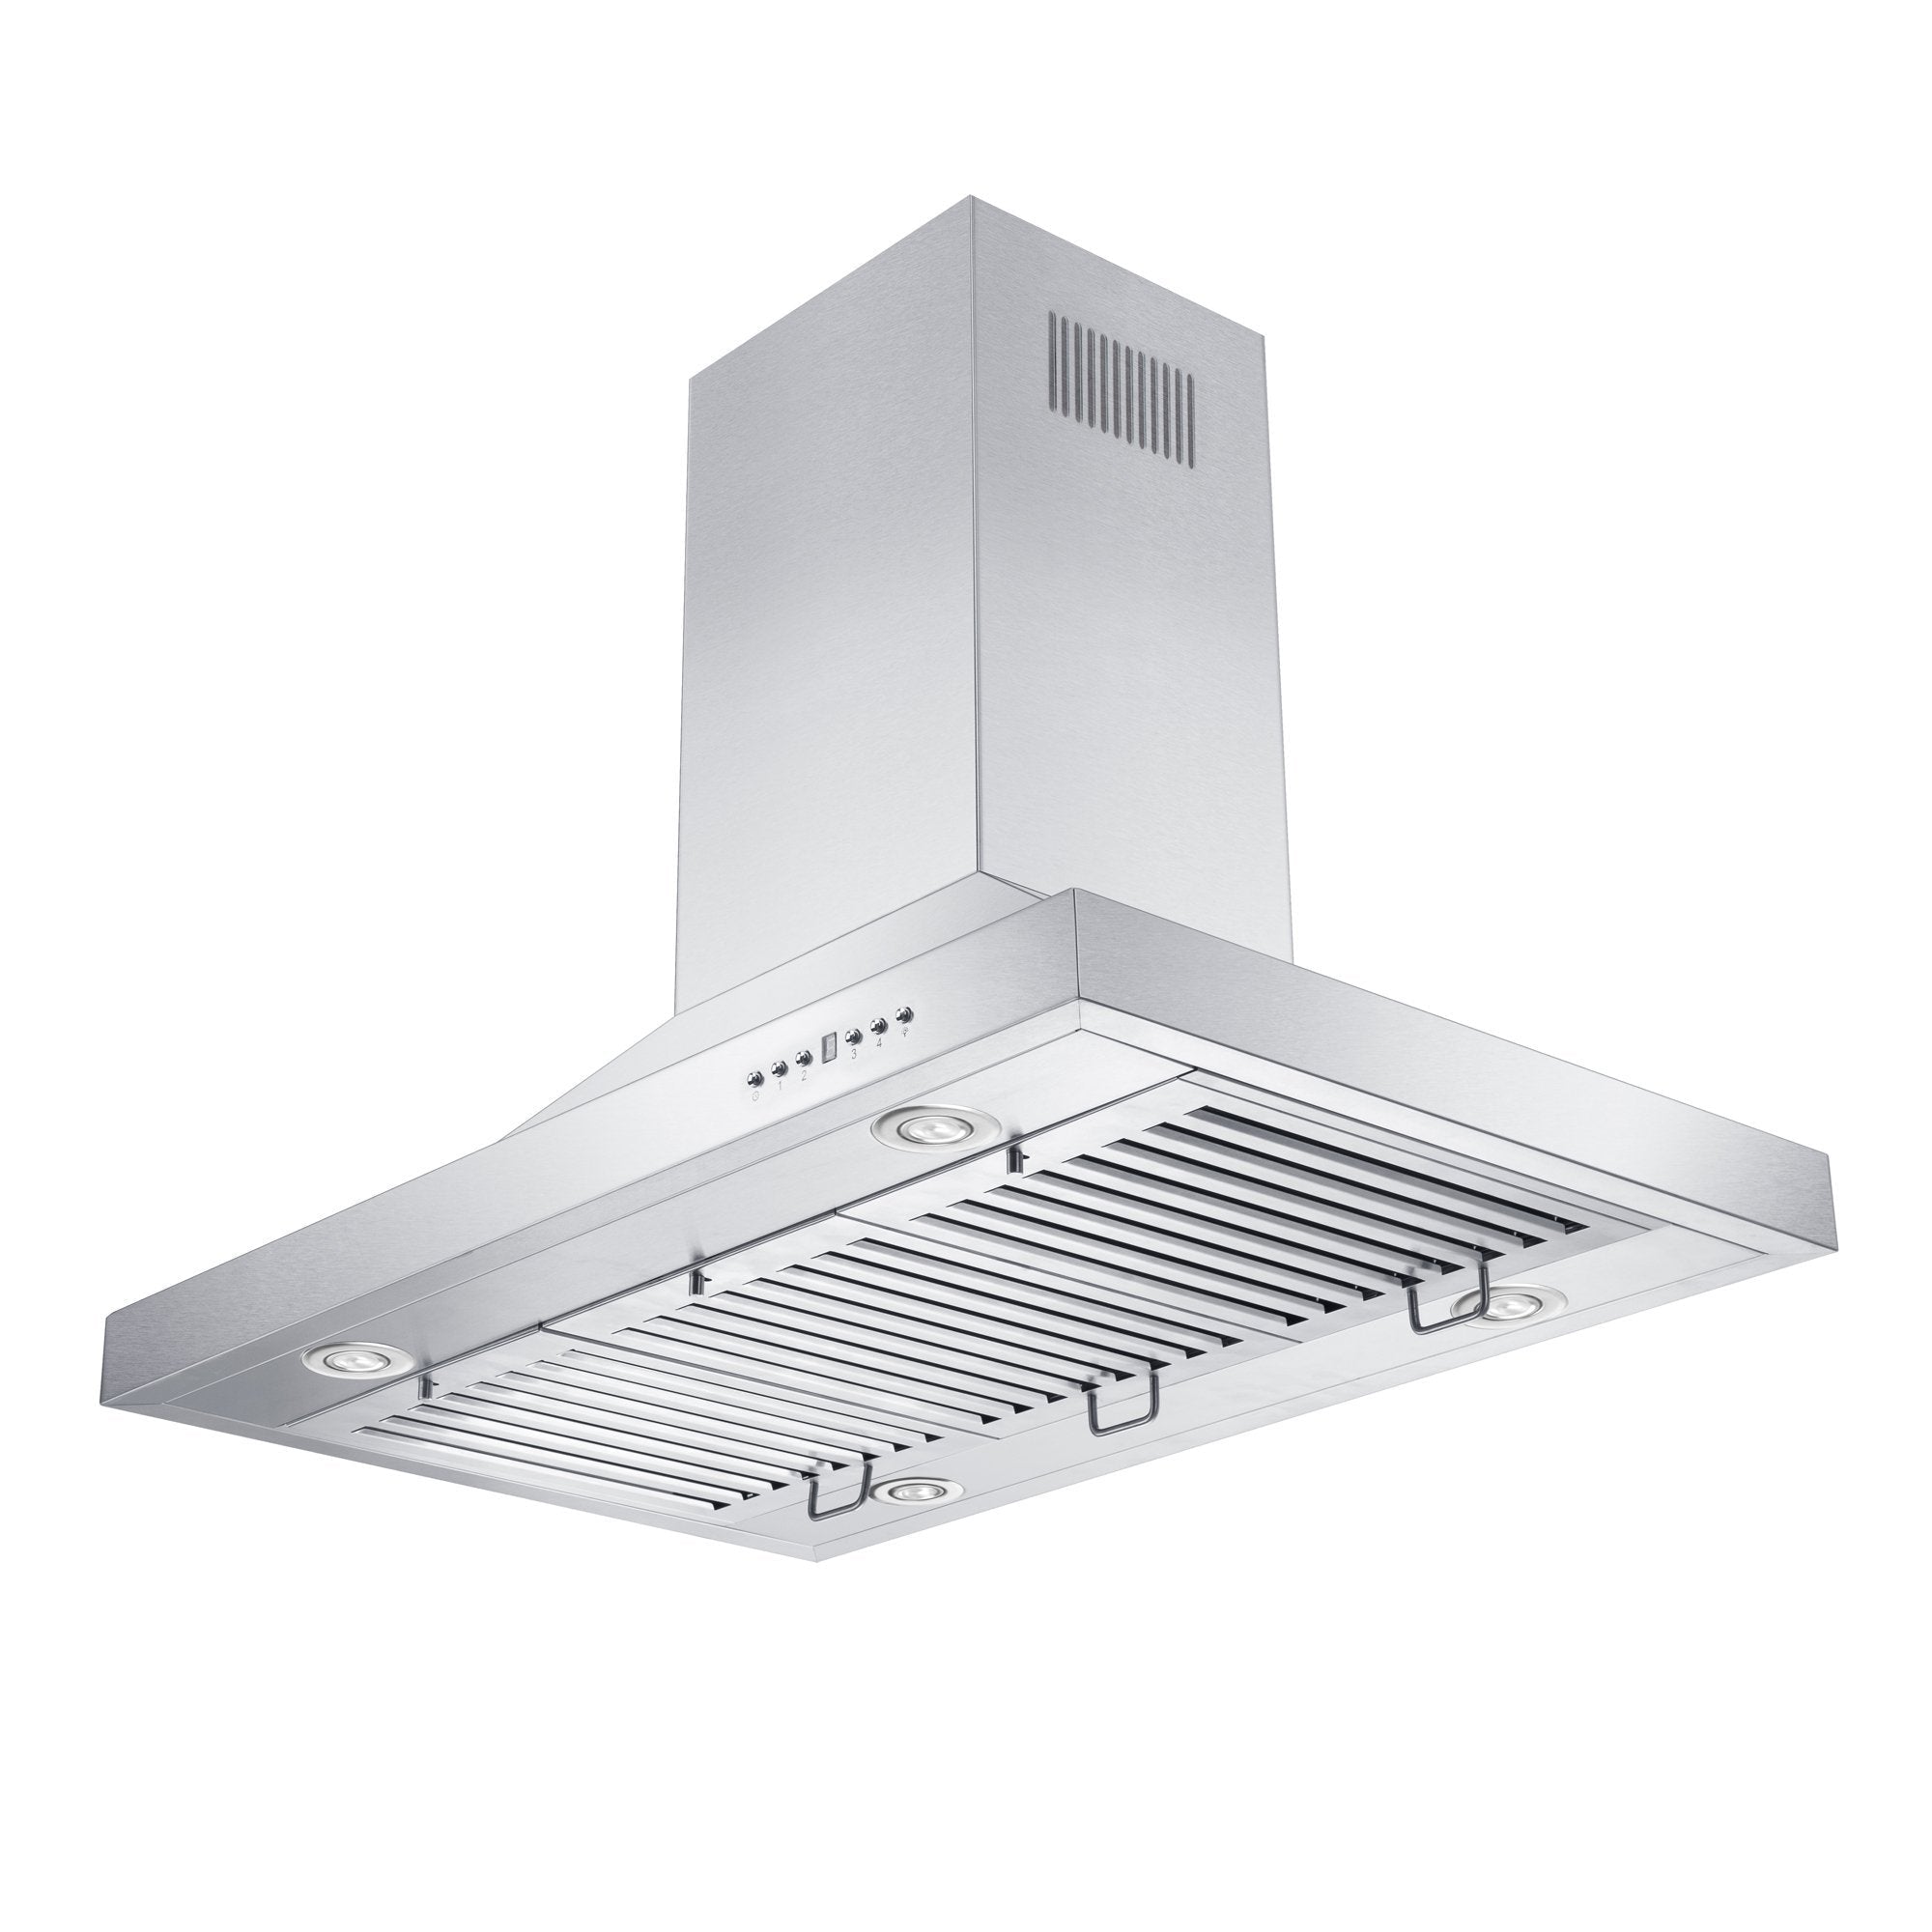 36" Convertible Vent Island Mount Range Hood in Stainless Steel (GL2i-36)